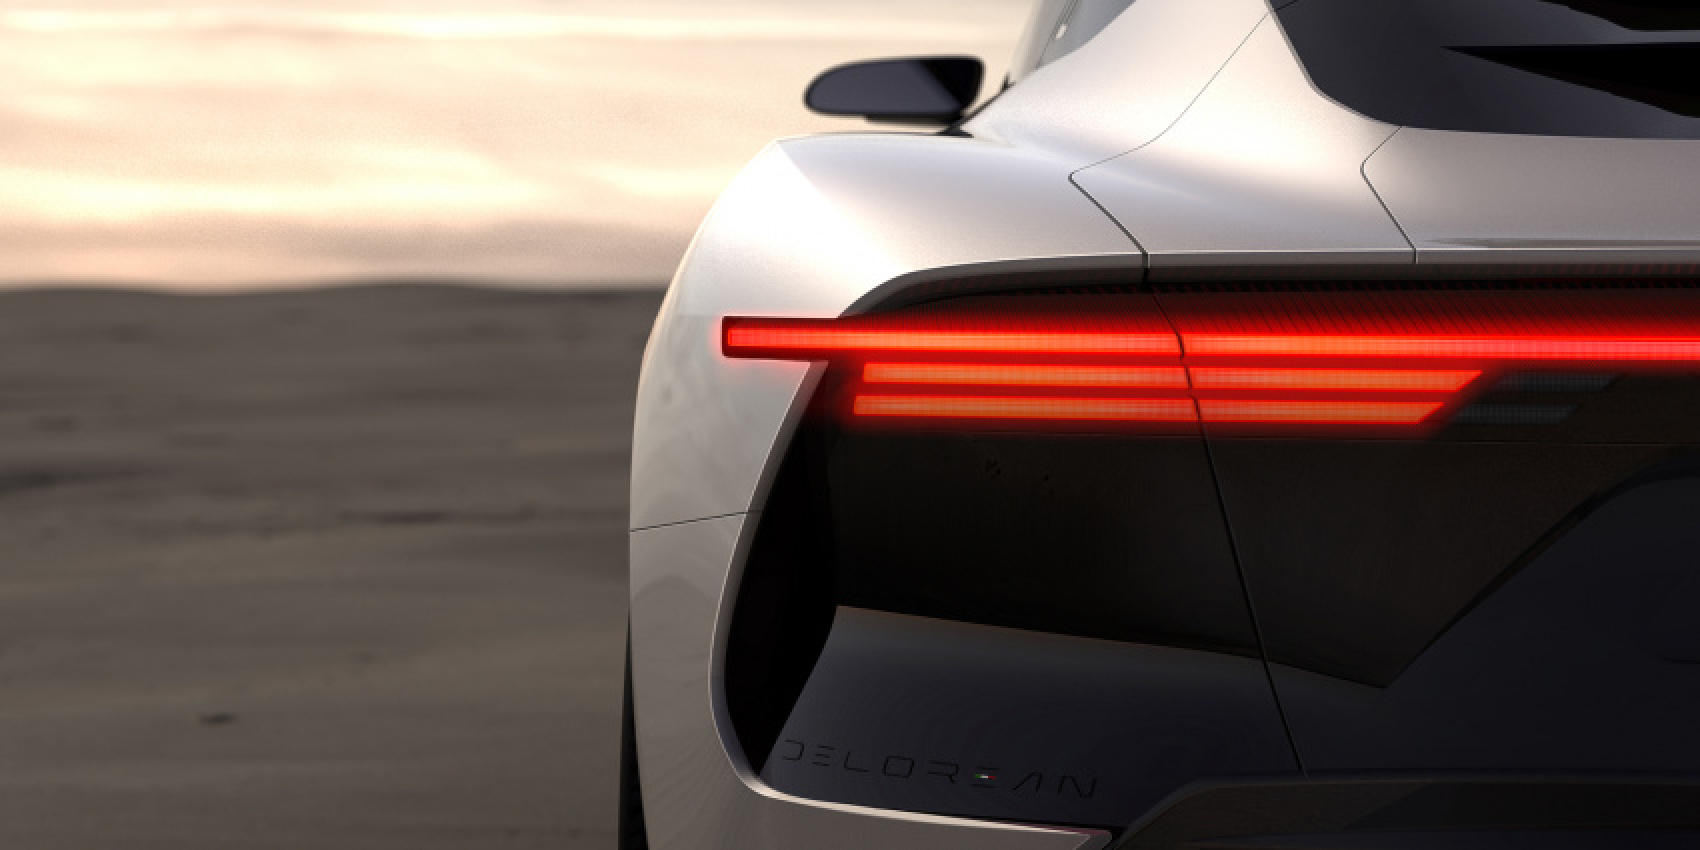 autos, cars, delorean, delorean motor company teases reveal date and sleek image of its gull-winged ev